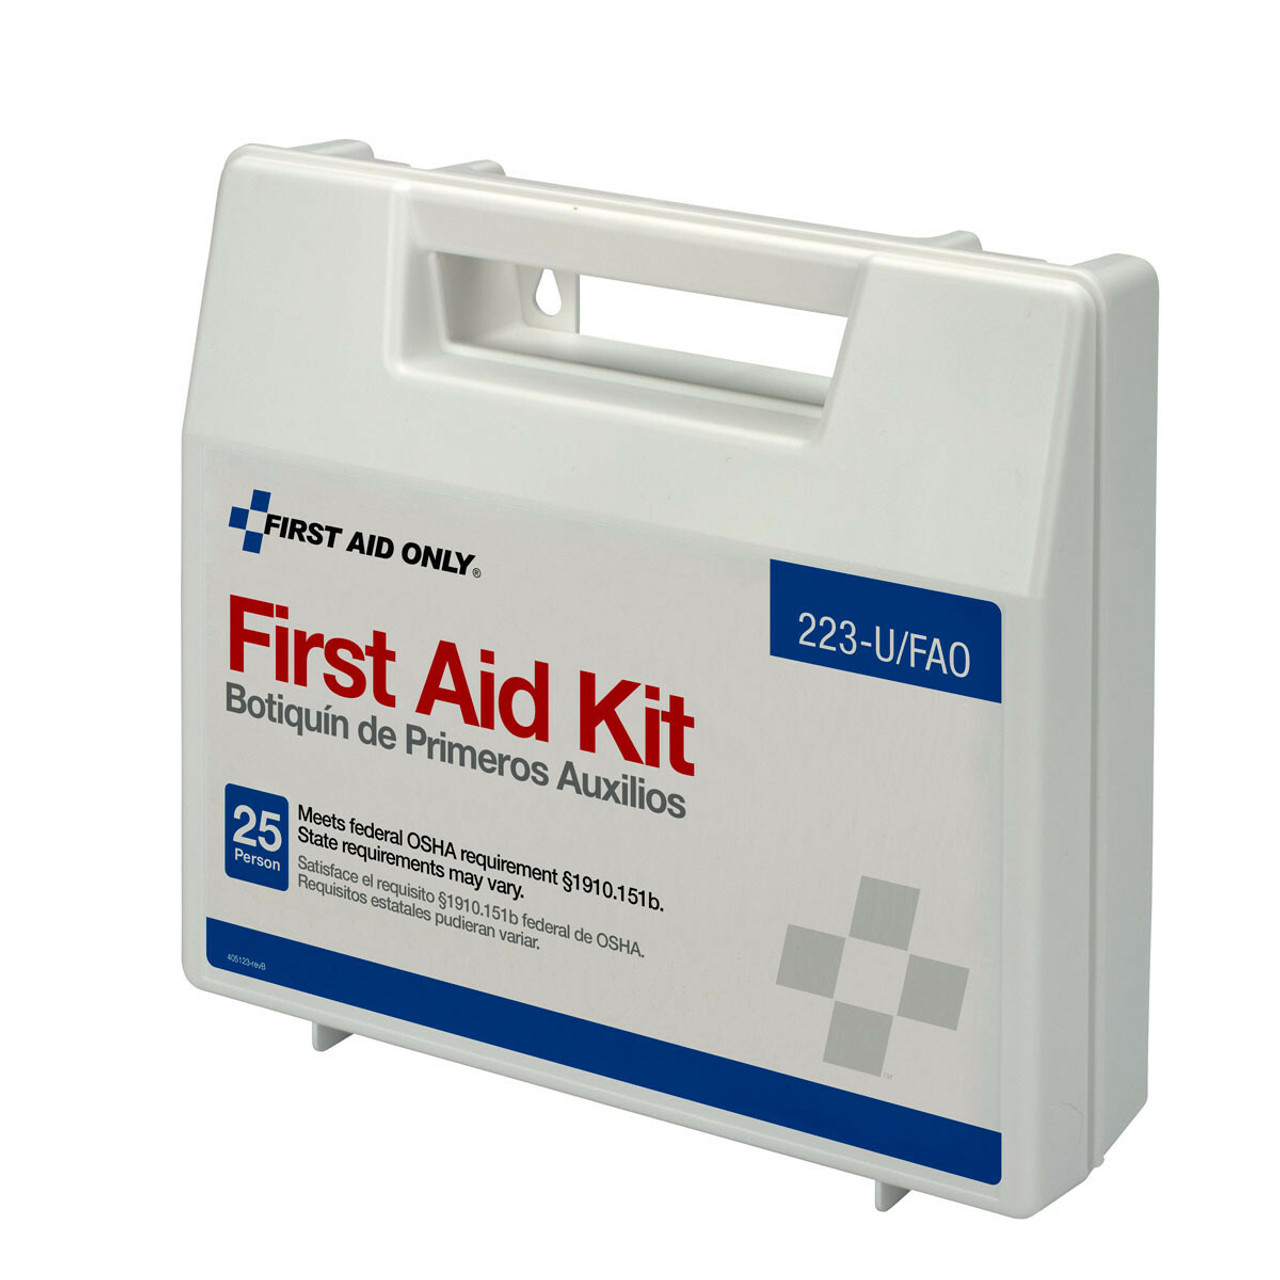 Please add these to your first aid kit, you never know when they might